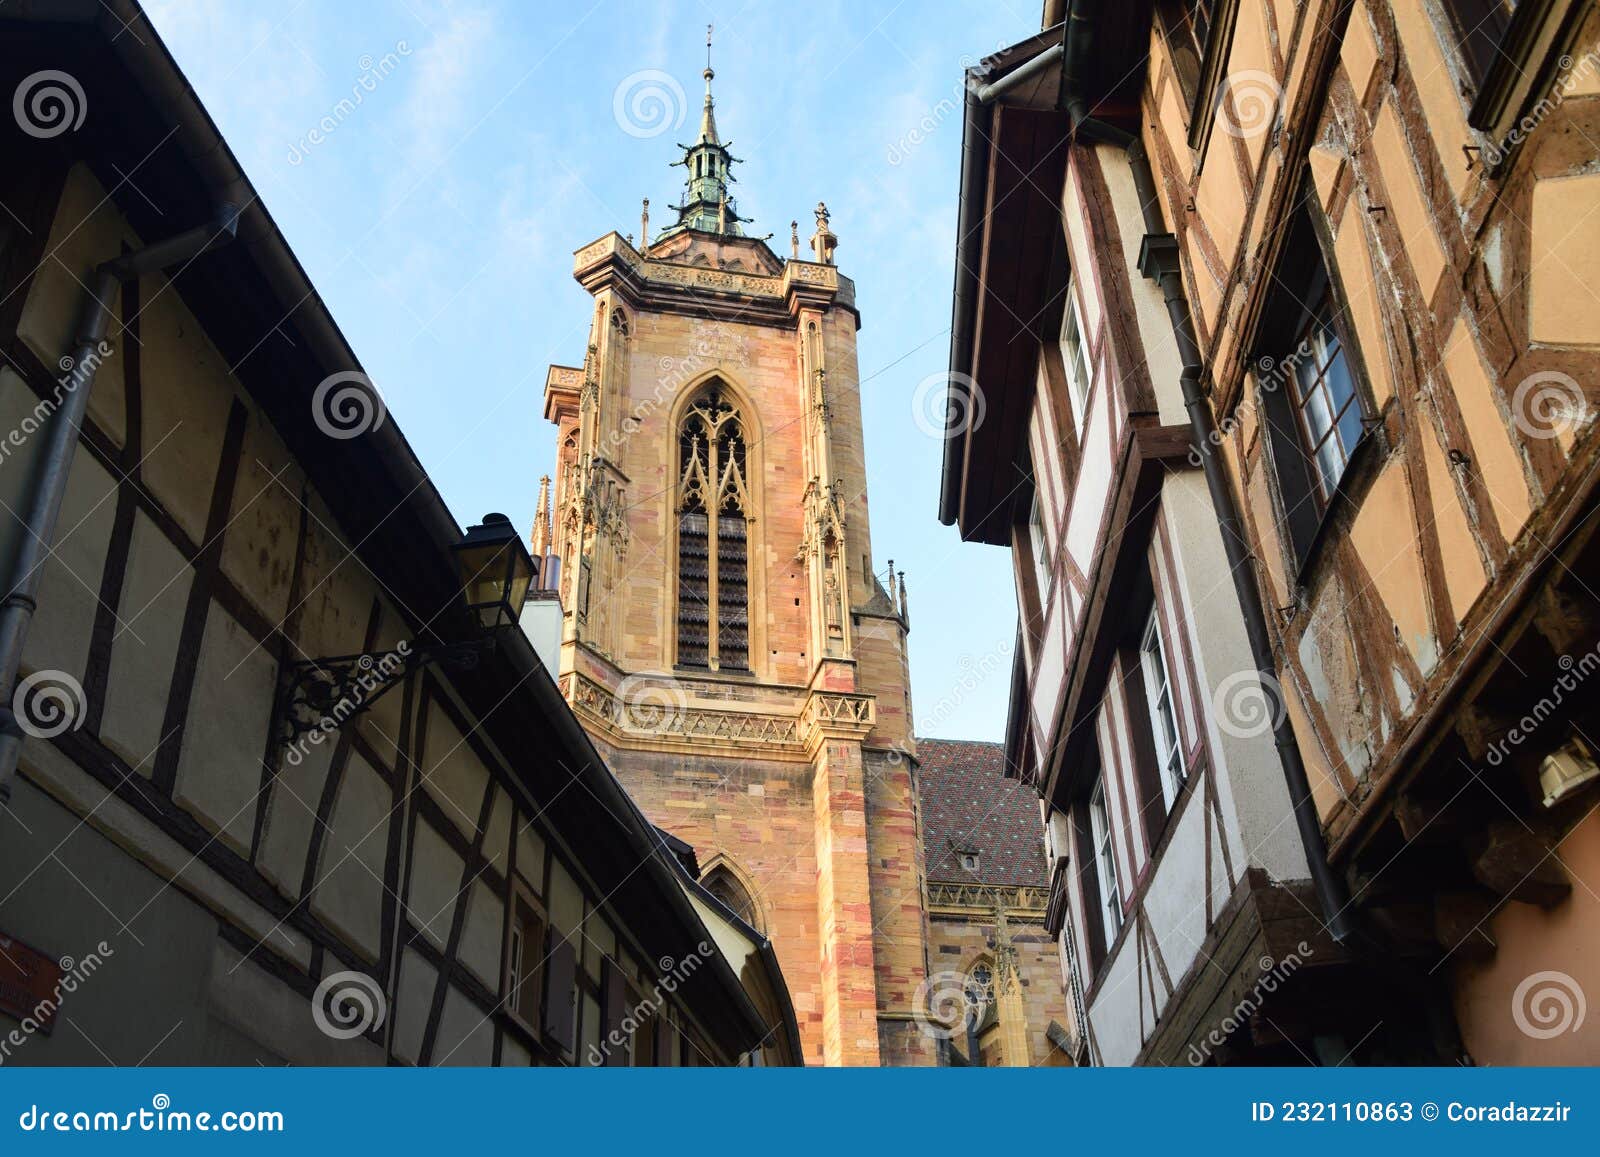 colors and architecture in colmar